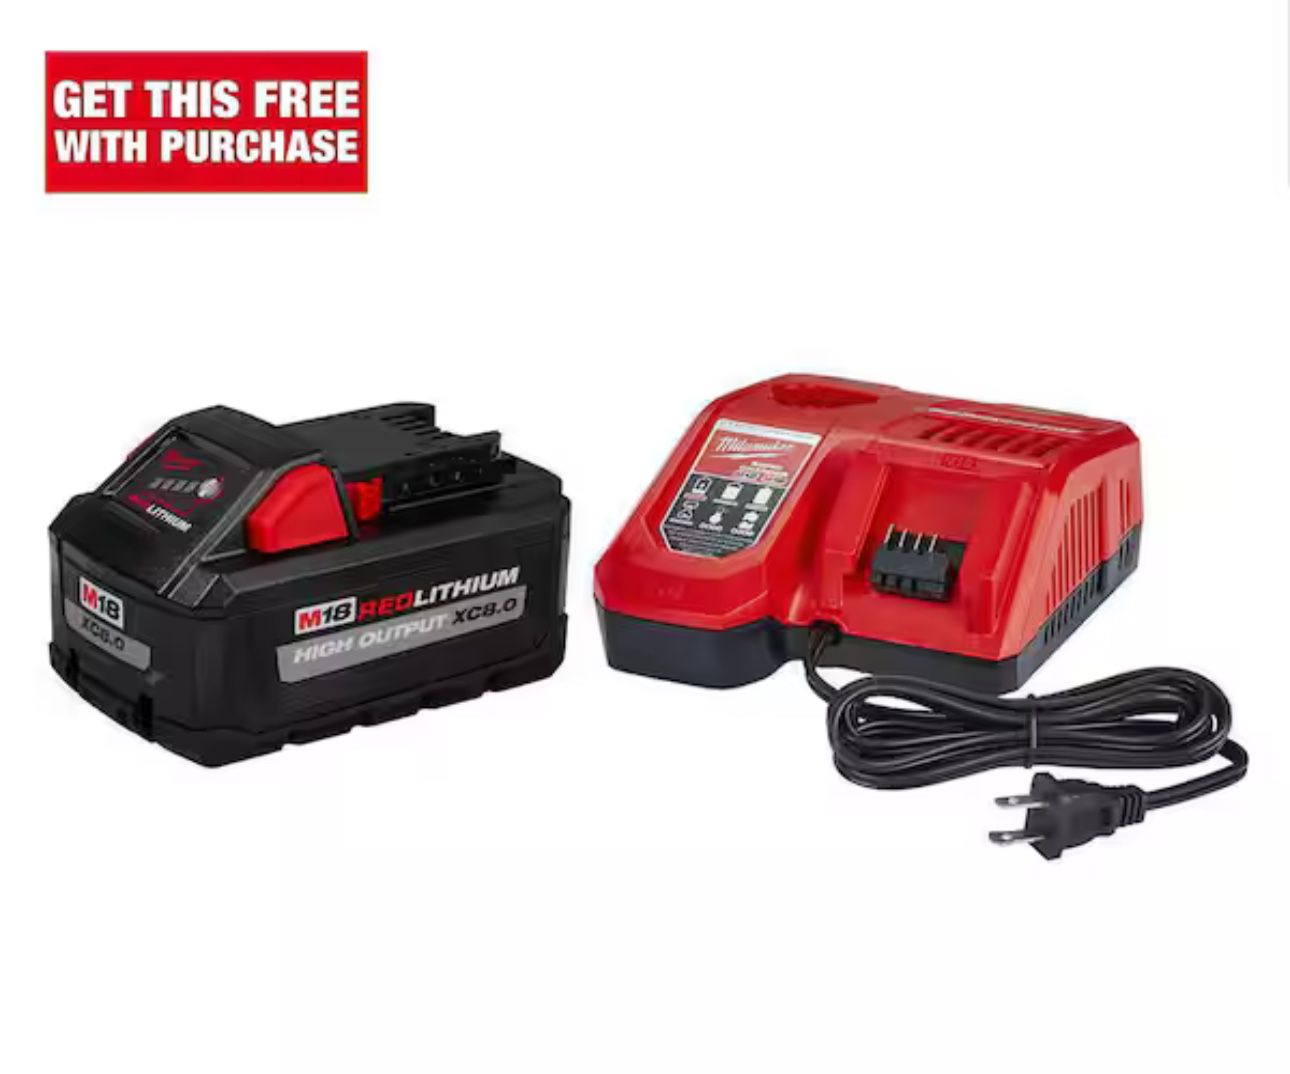 M18 18-Volt Lithium-Ion HIGH OUTPUT Starter Kit with XC 8.0Ah Battery and Rapid Charger 1.1k